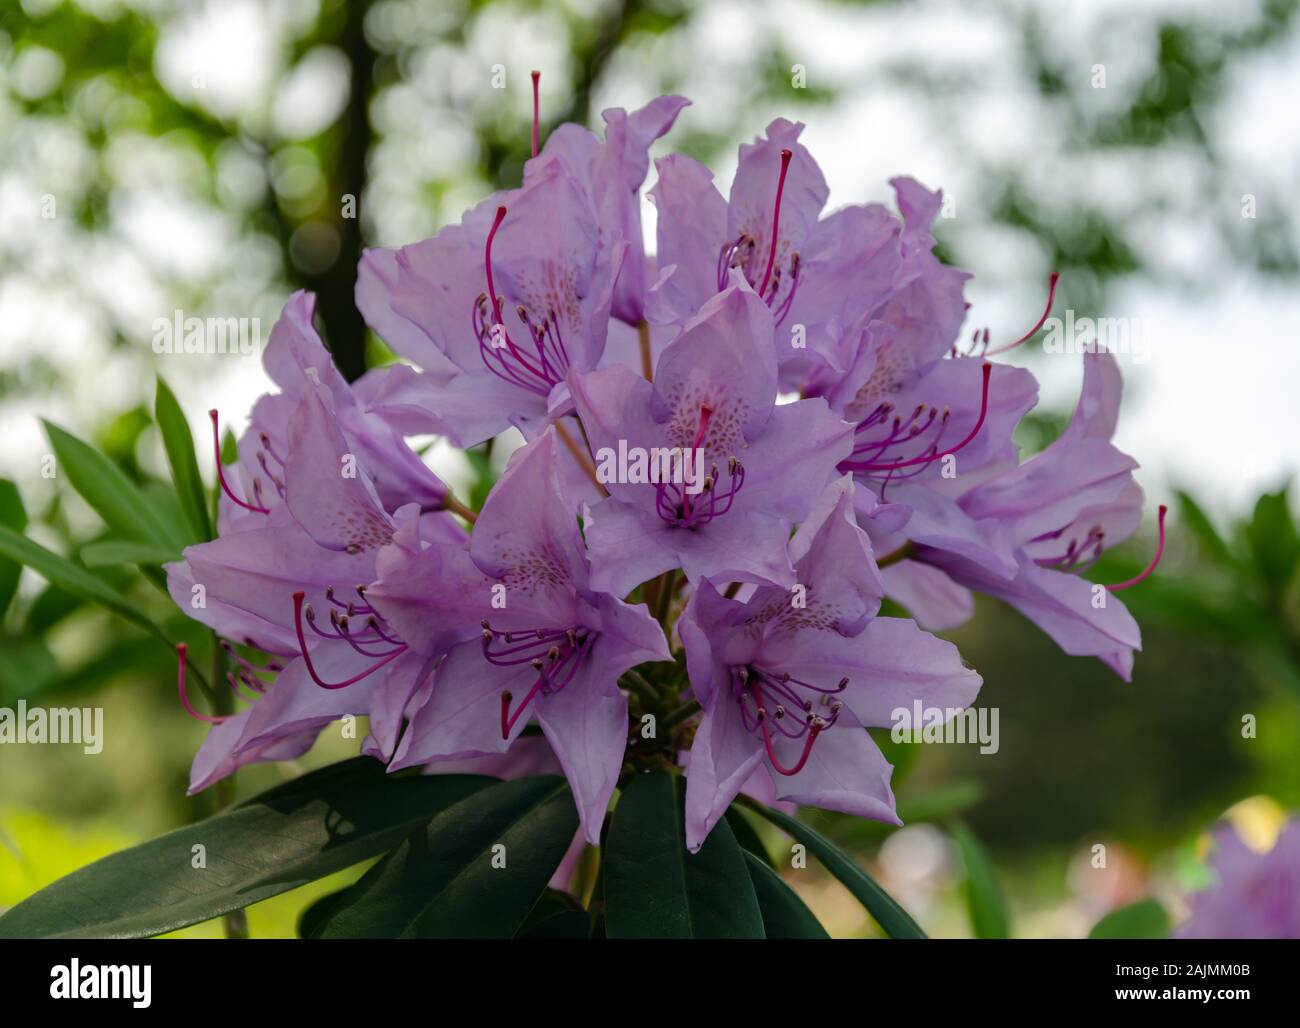 Rhododendron inflorescence on a bush with green leaves on a sunny day in the garden, close-up Stock Photo